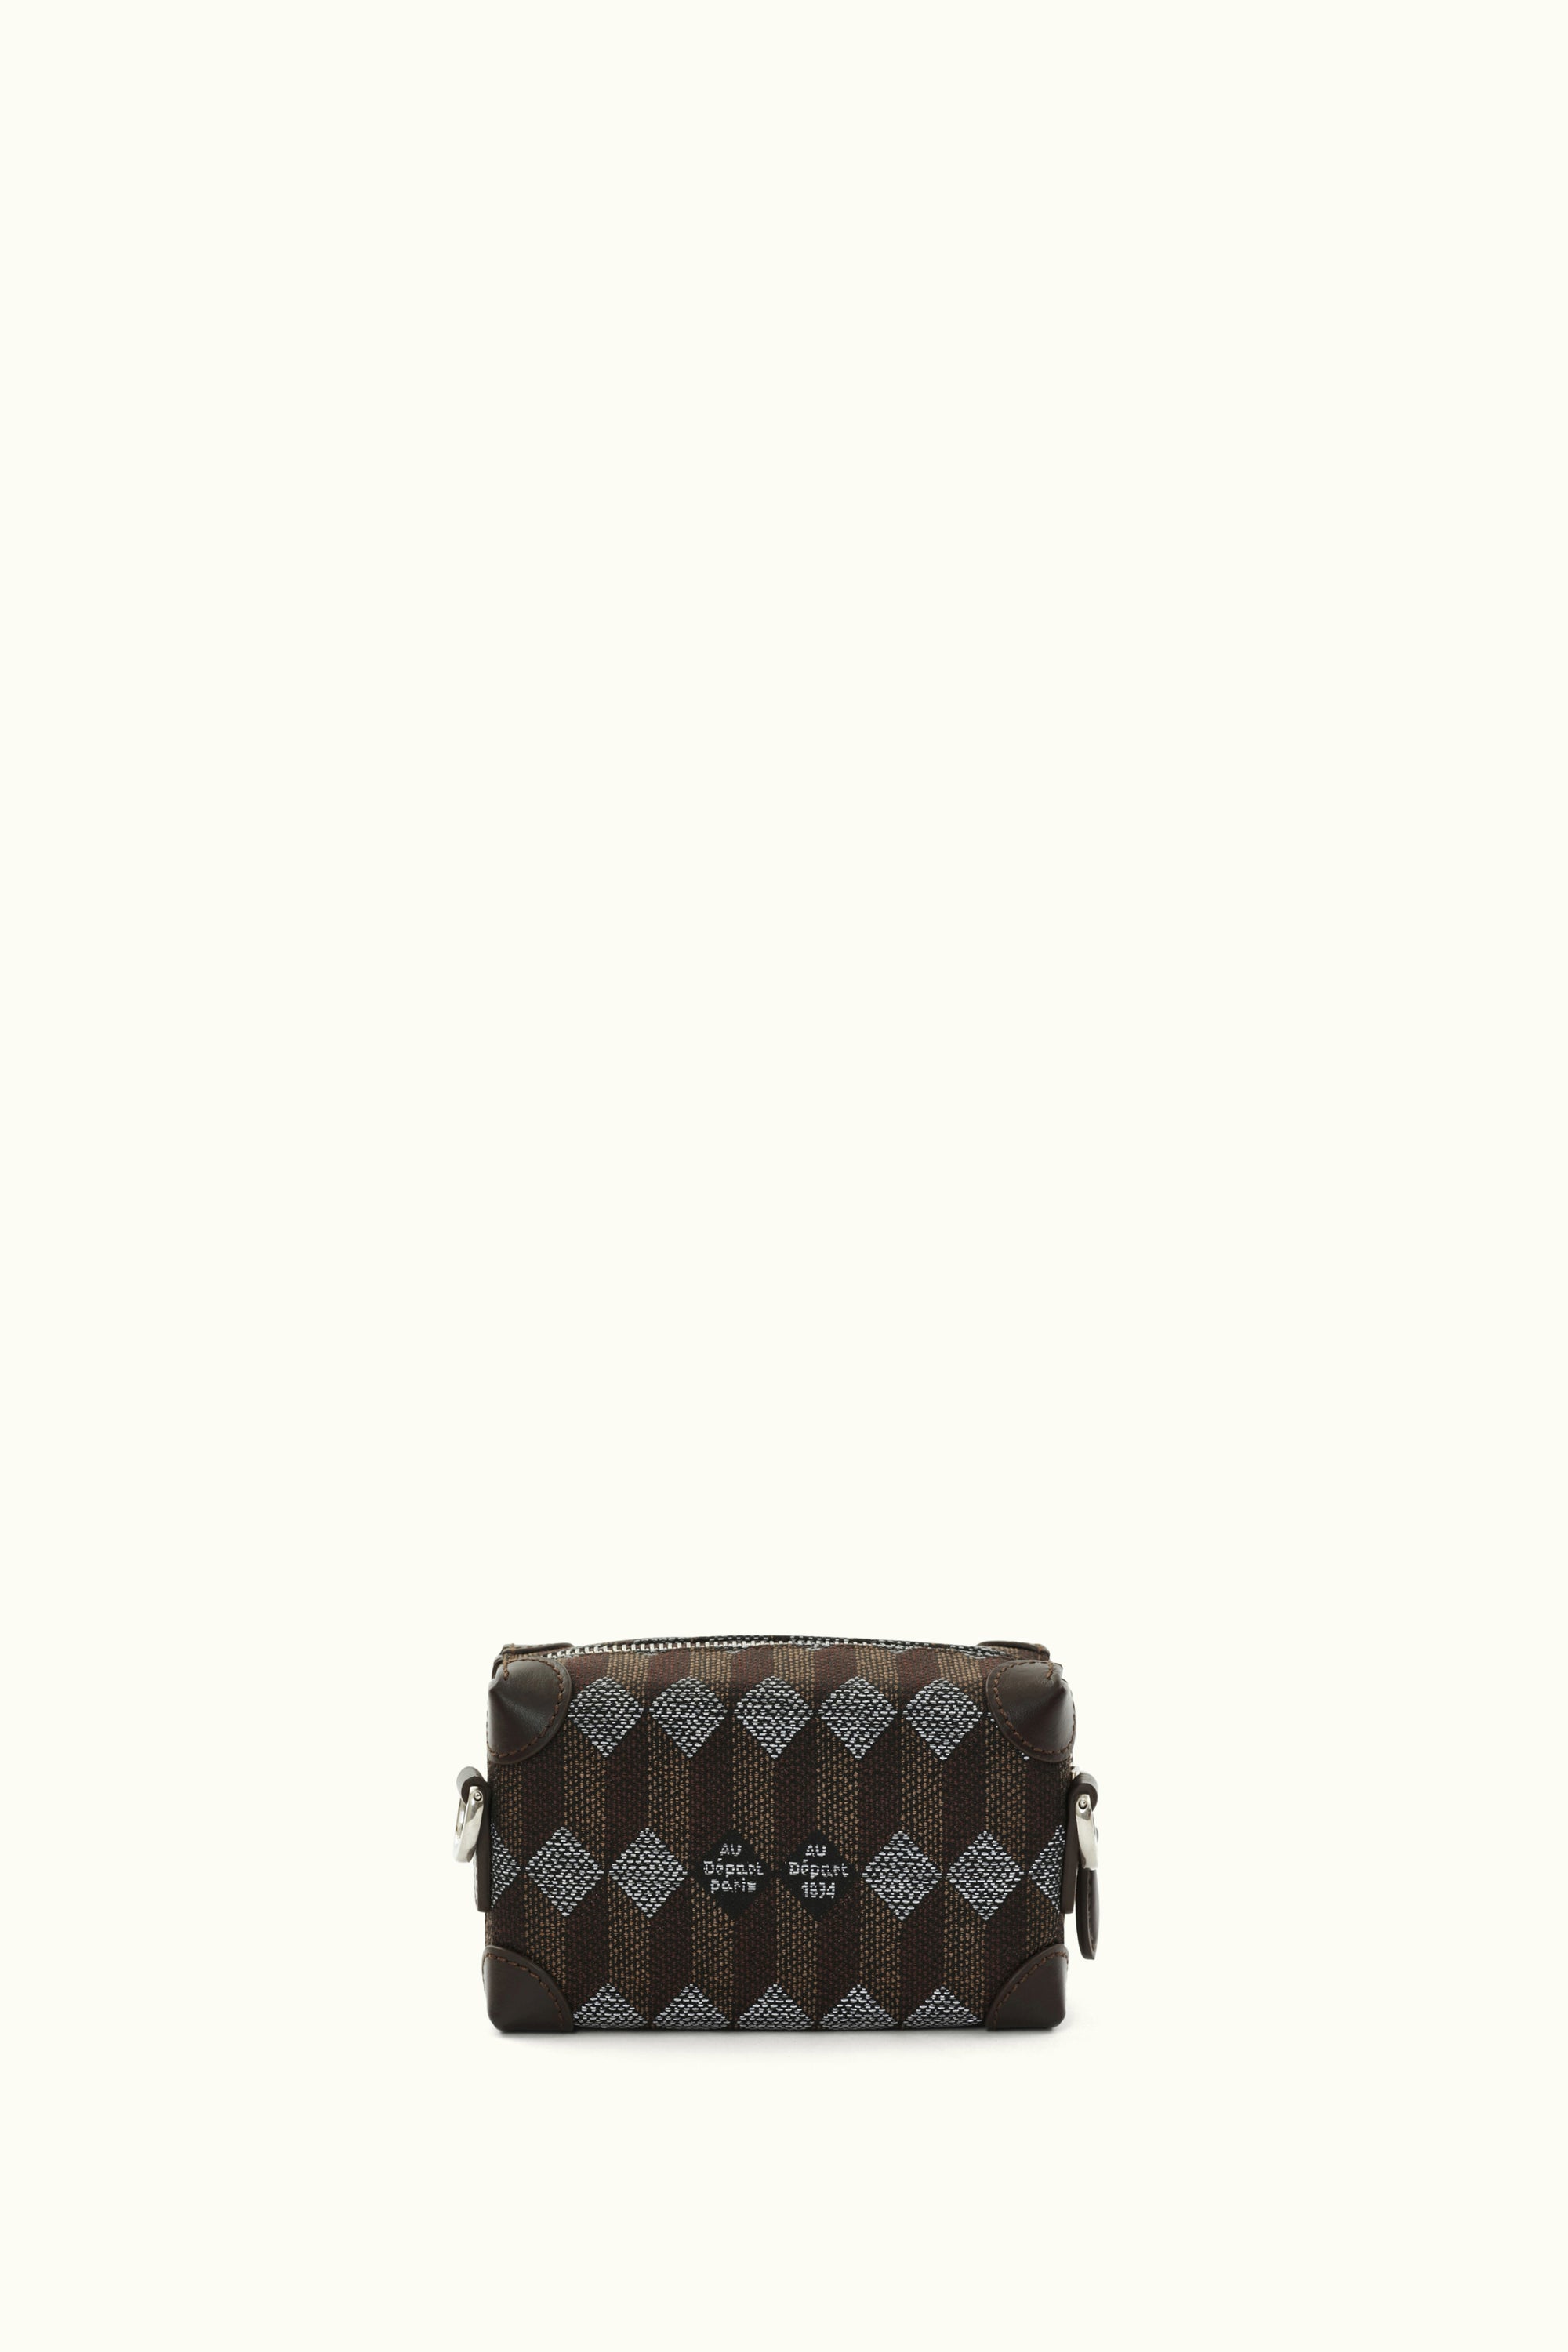 Trunk Soft Large Bag in black leather